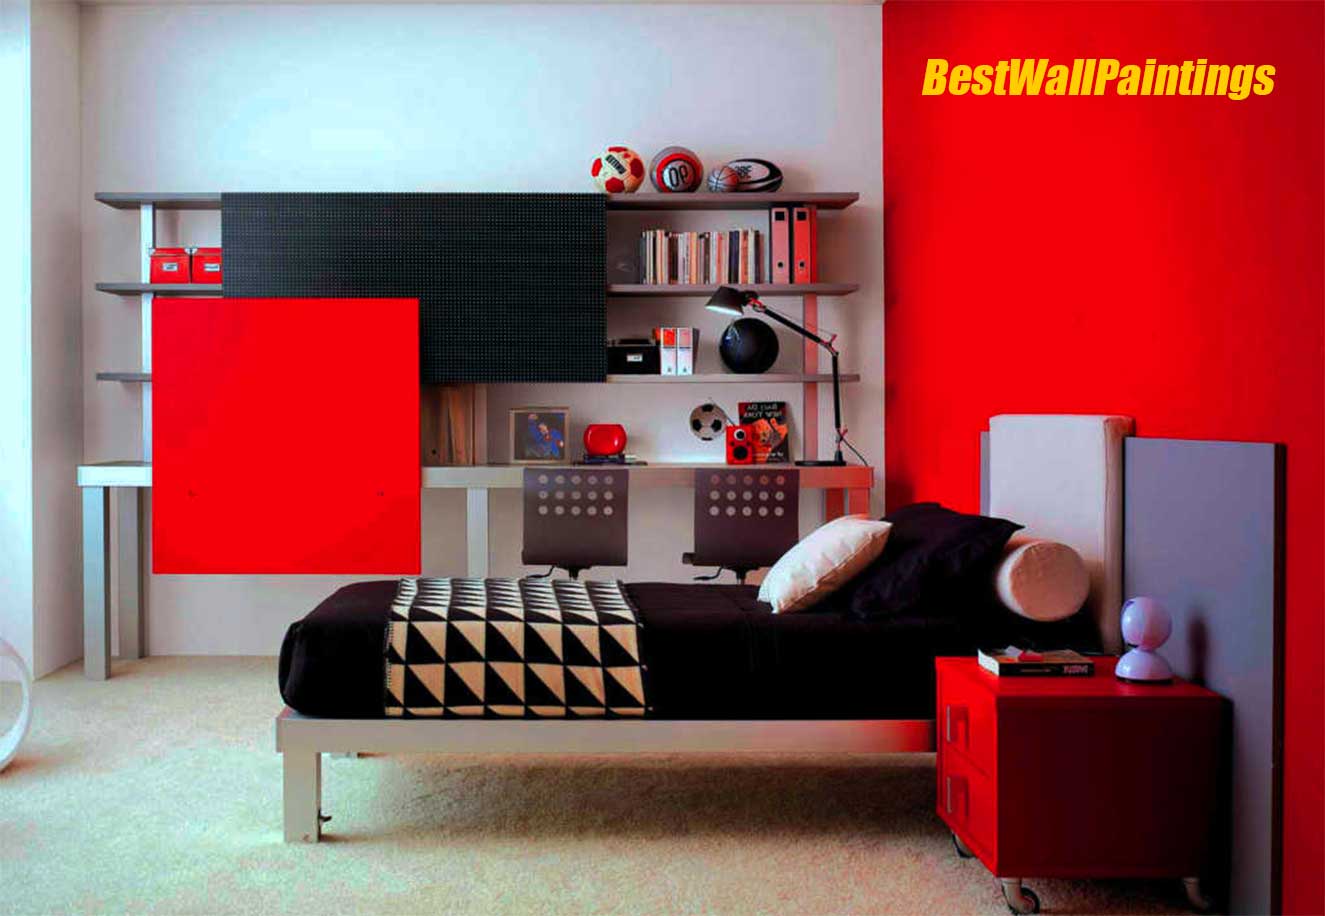 red and white bedroom ideas